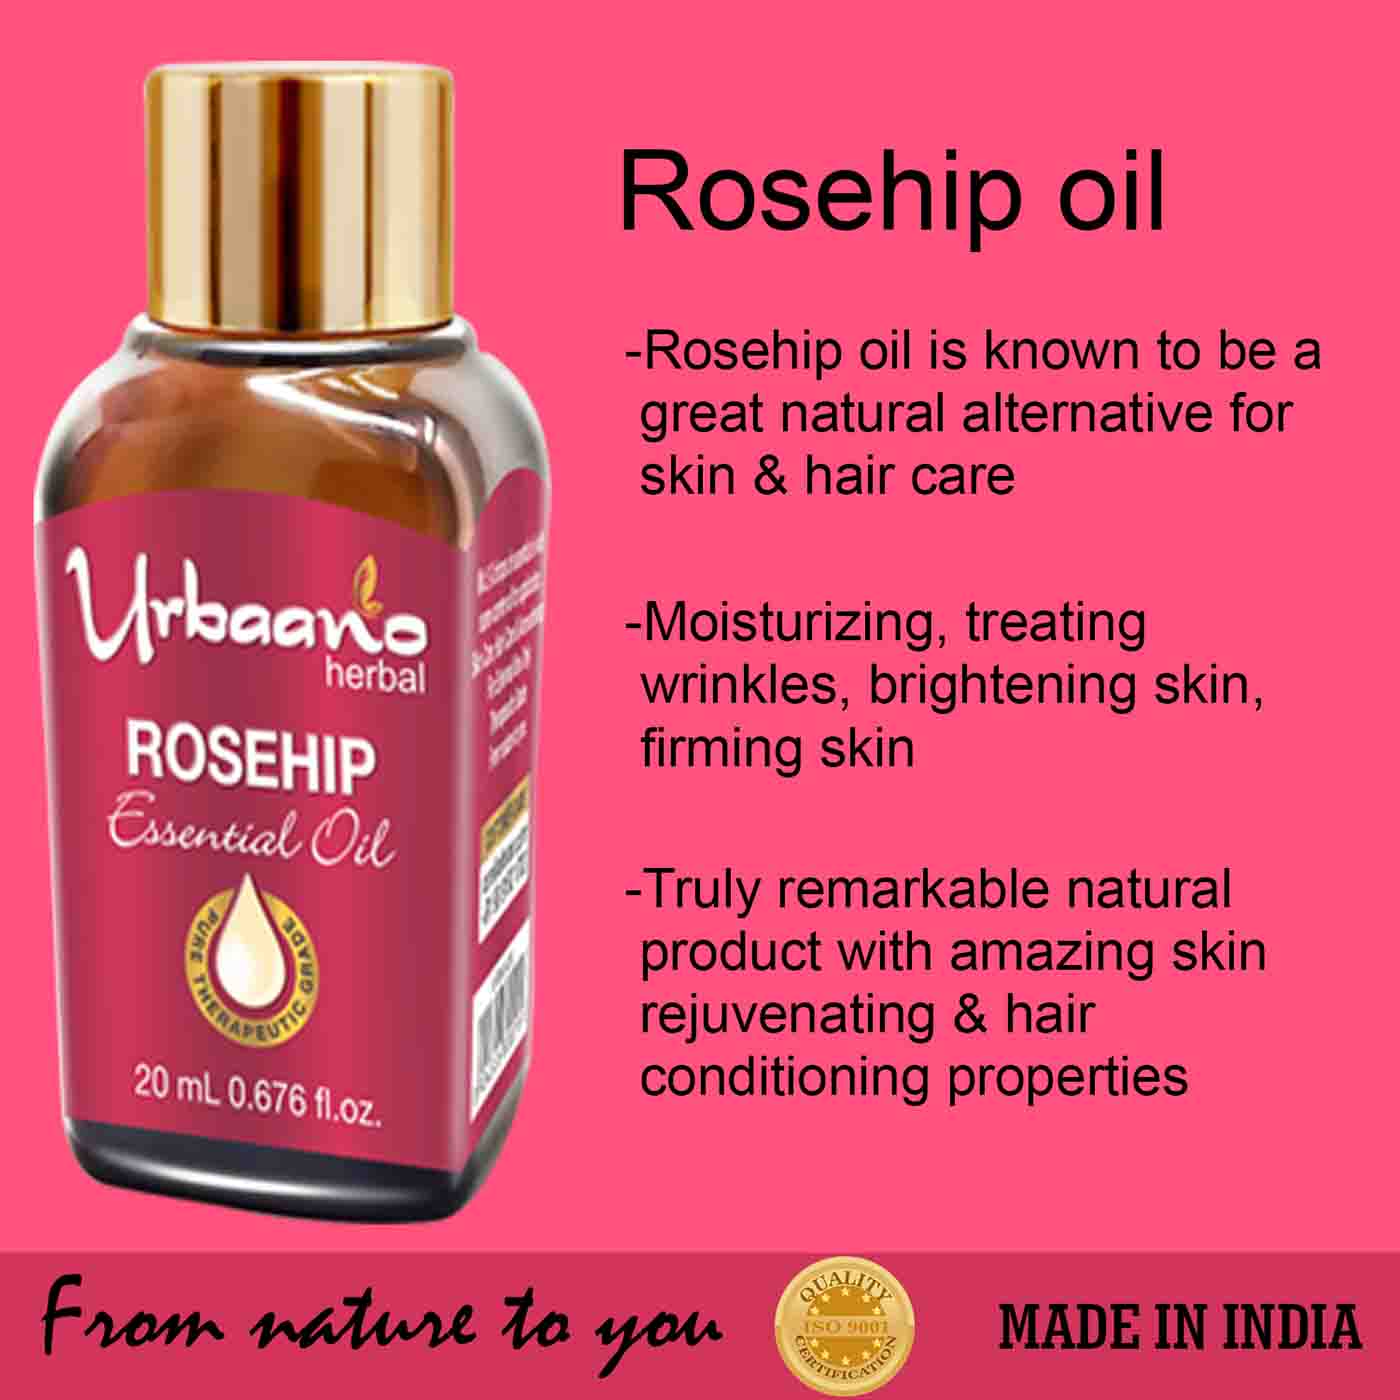 urbaano herbal rosehip essential oil, carrier oil, for skincare pure & natural